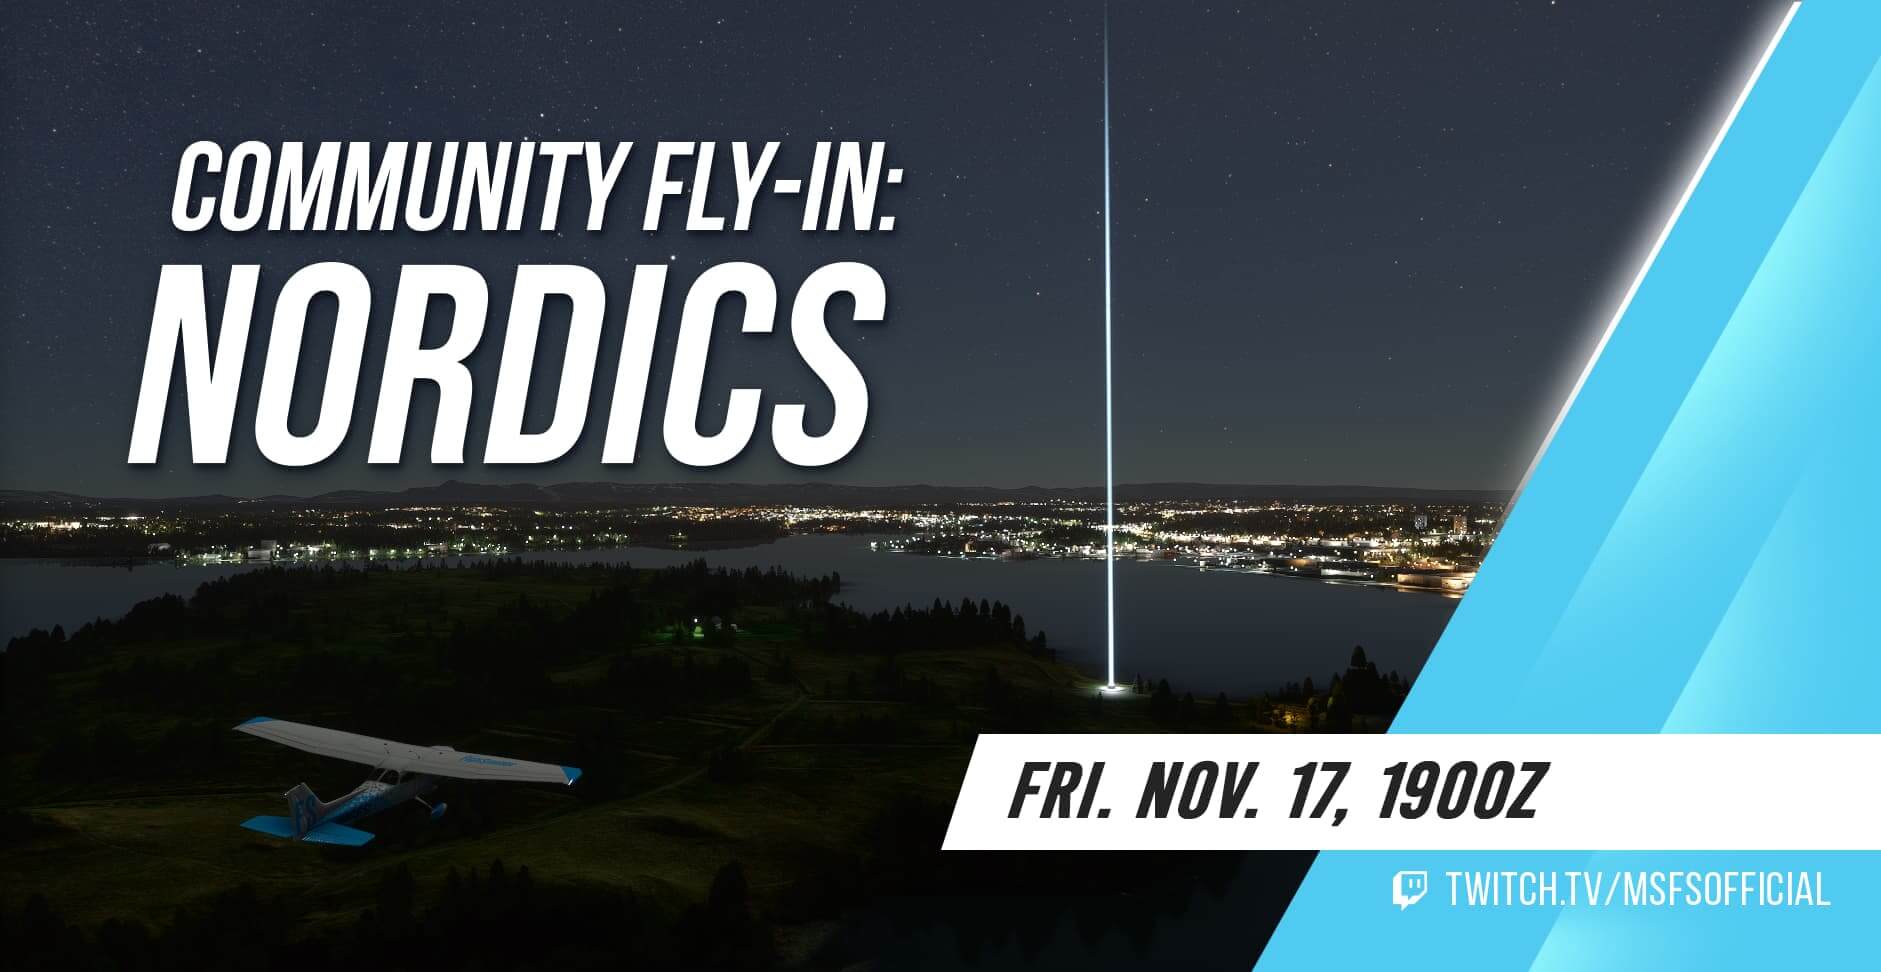 Community Fly-In: Nordics. Friday 17th November 2023 at 19:00z. www.twitch.tv/msfsofficial